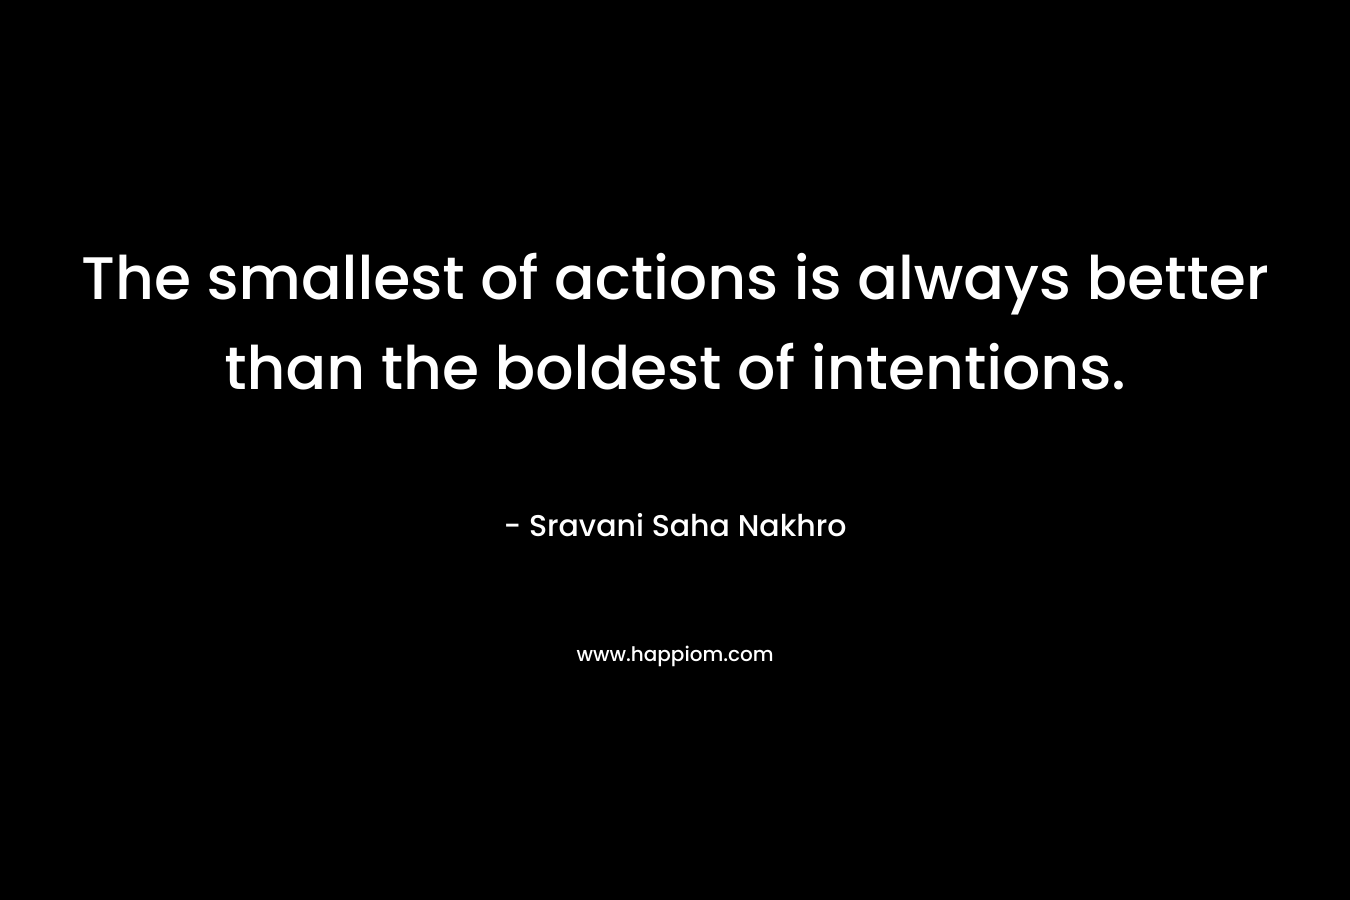 The smallest of actions is always better than the boldest of intentions.